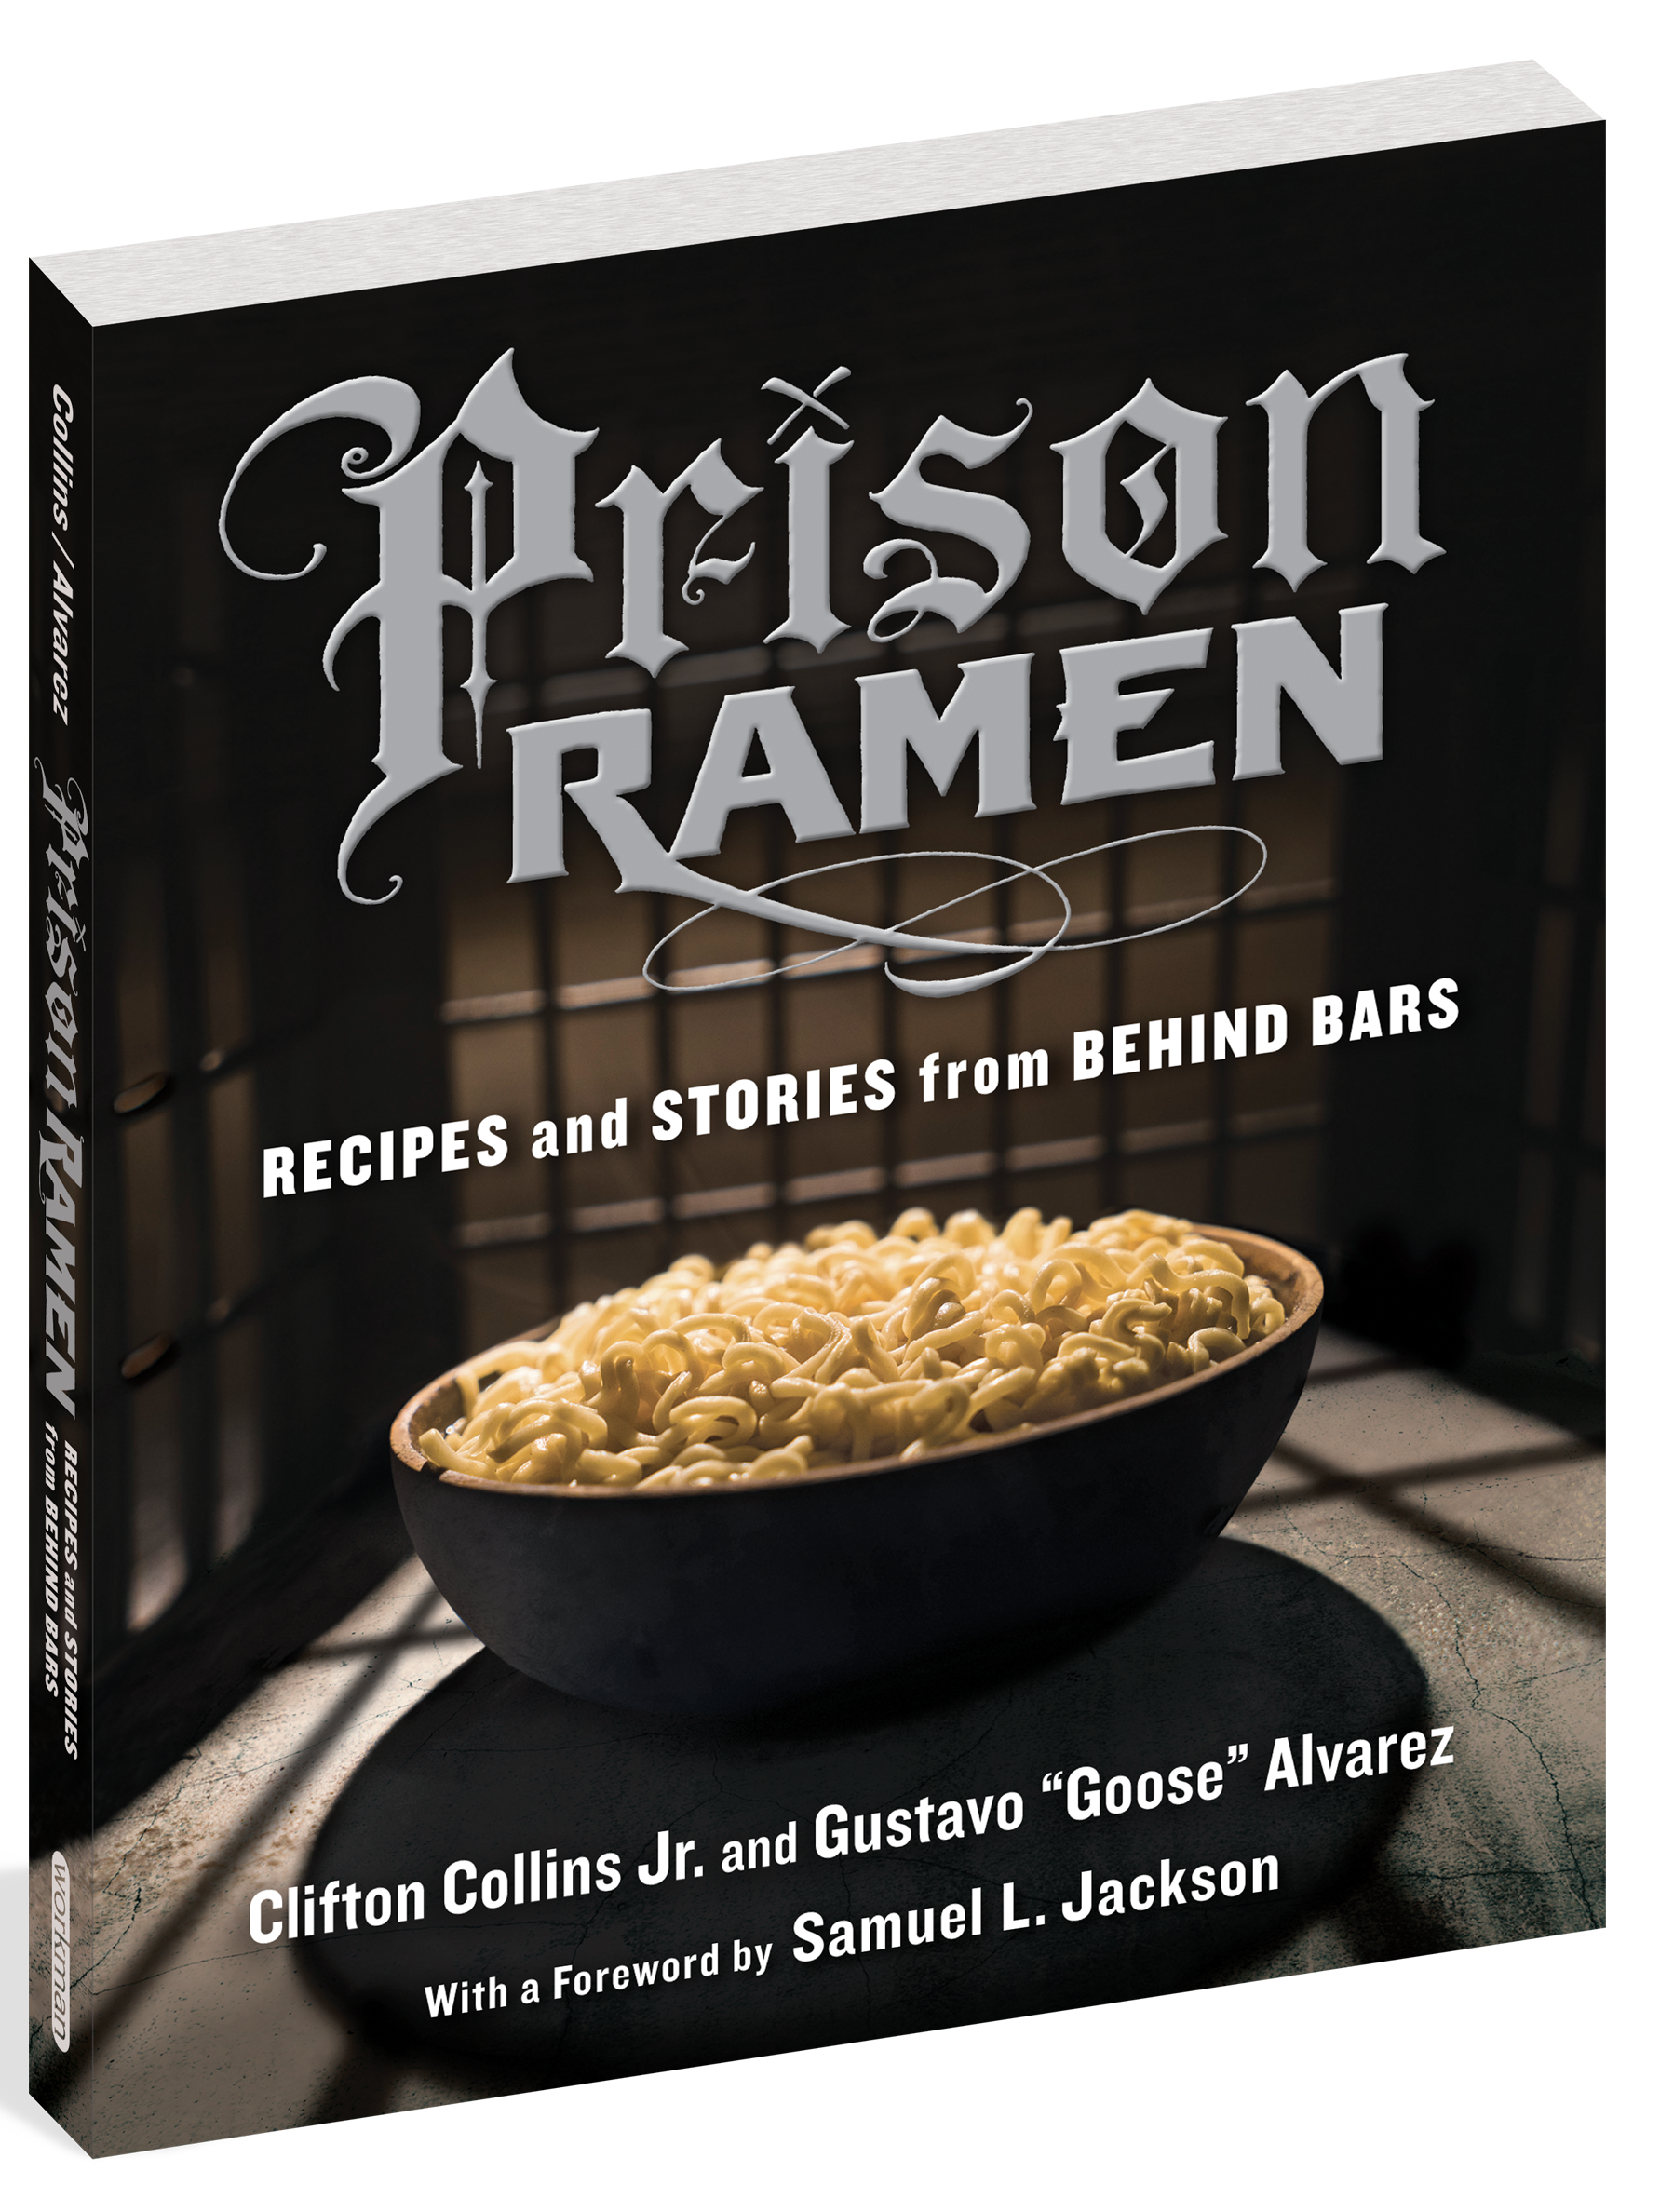 Prison Ramen: Recipes and Stories from Behind Bars by Actor Clifton Collins, $8